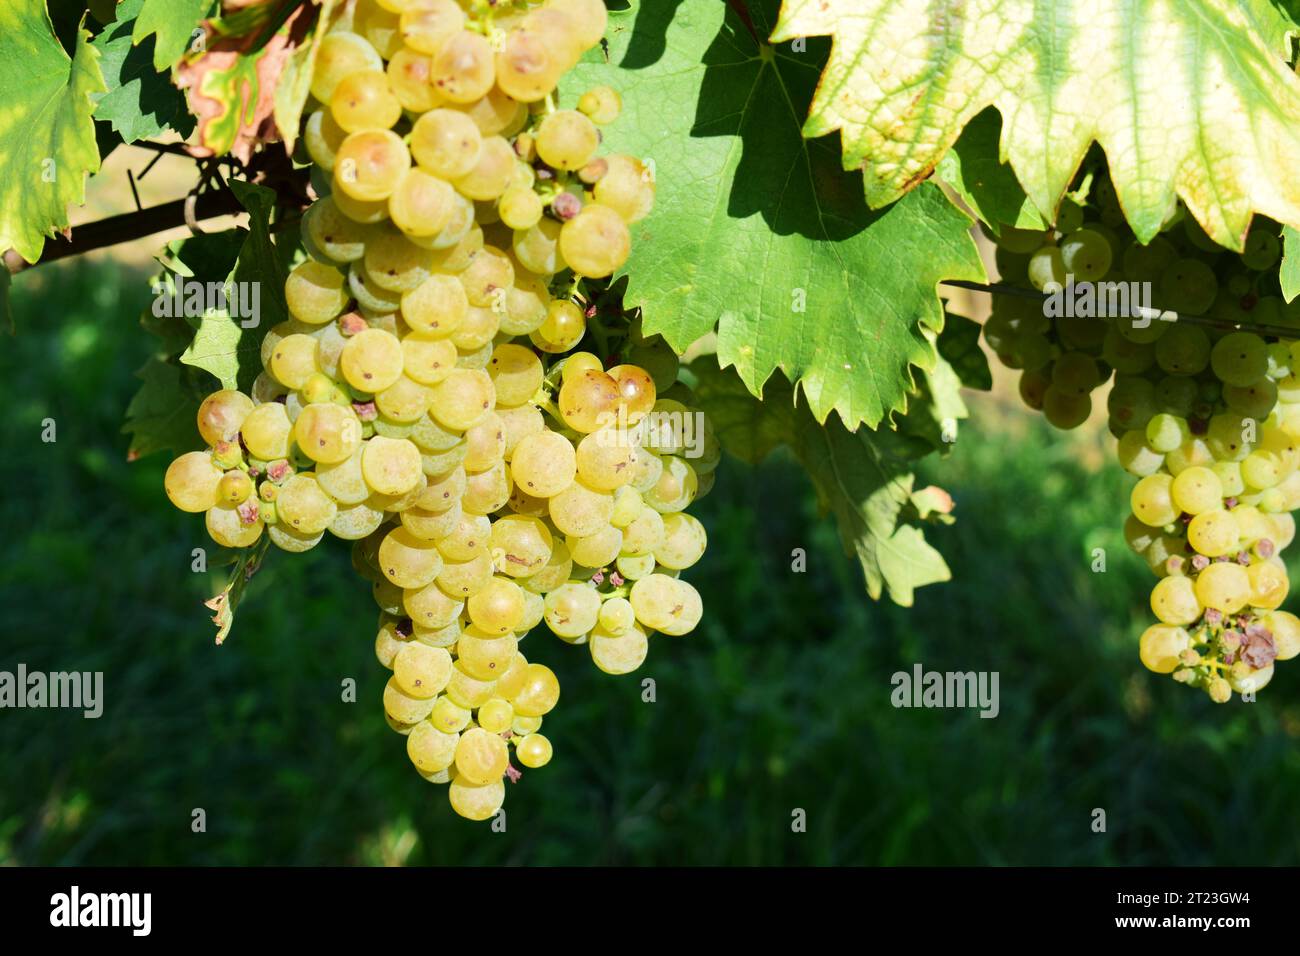 Bunch of ripe yellow white vine grapes in a vineyard in autumn harvest time Stock Photo